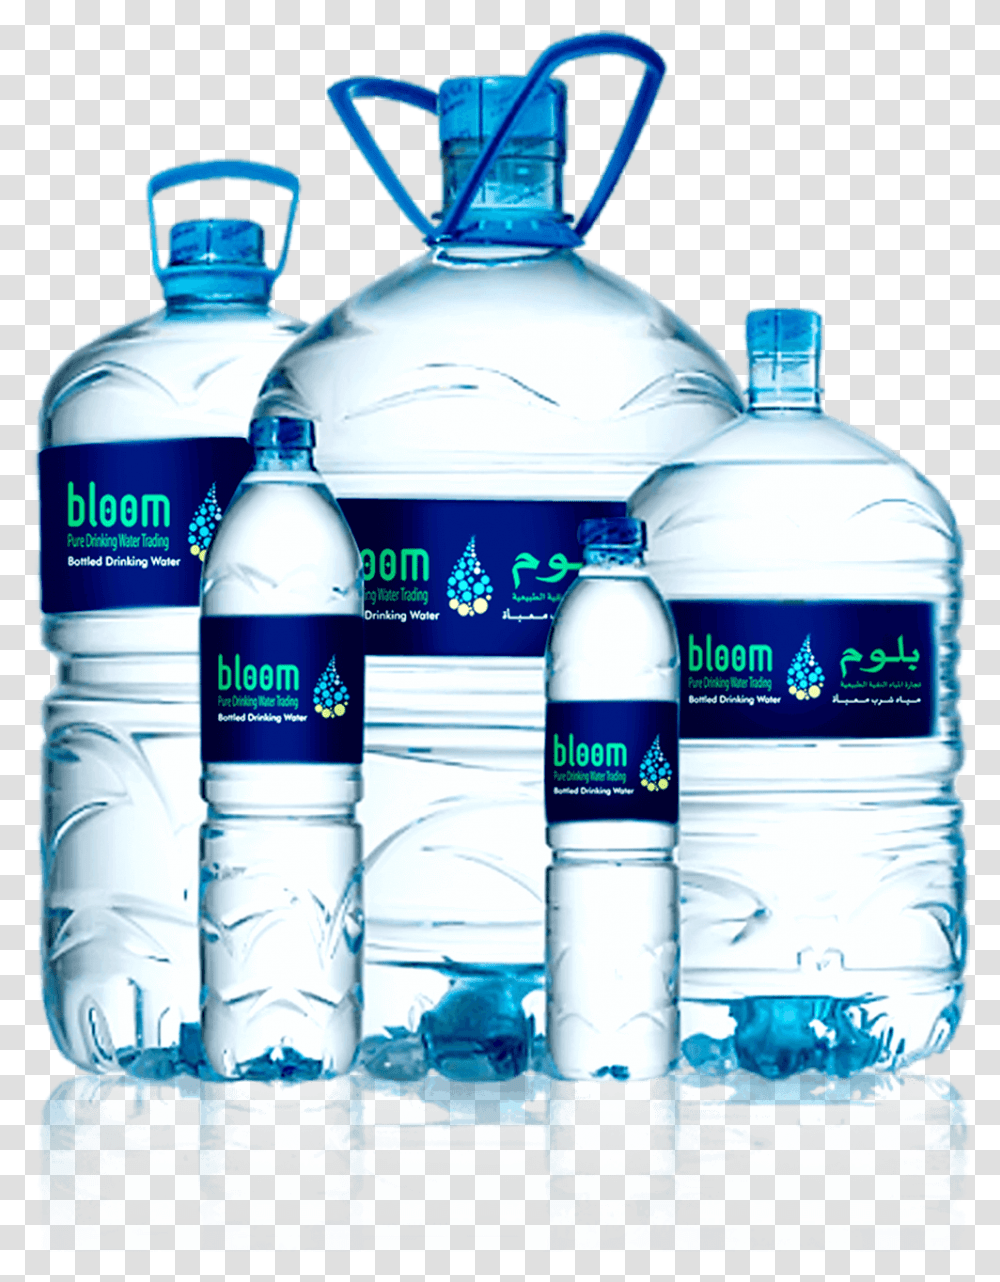 Pure Drinking Water Packaged Drinking Water Backgrounds, Bottle, Mineral Water, Beverage, Water Bottle Transparent Png